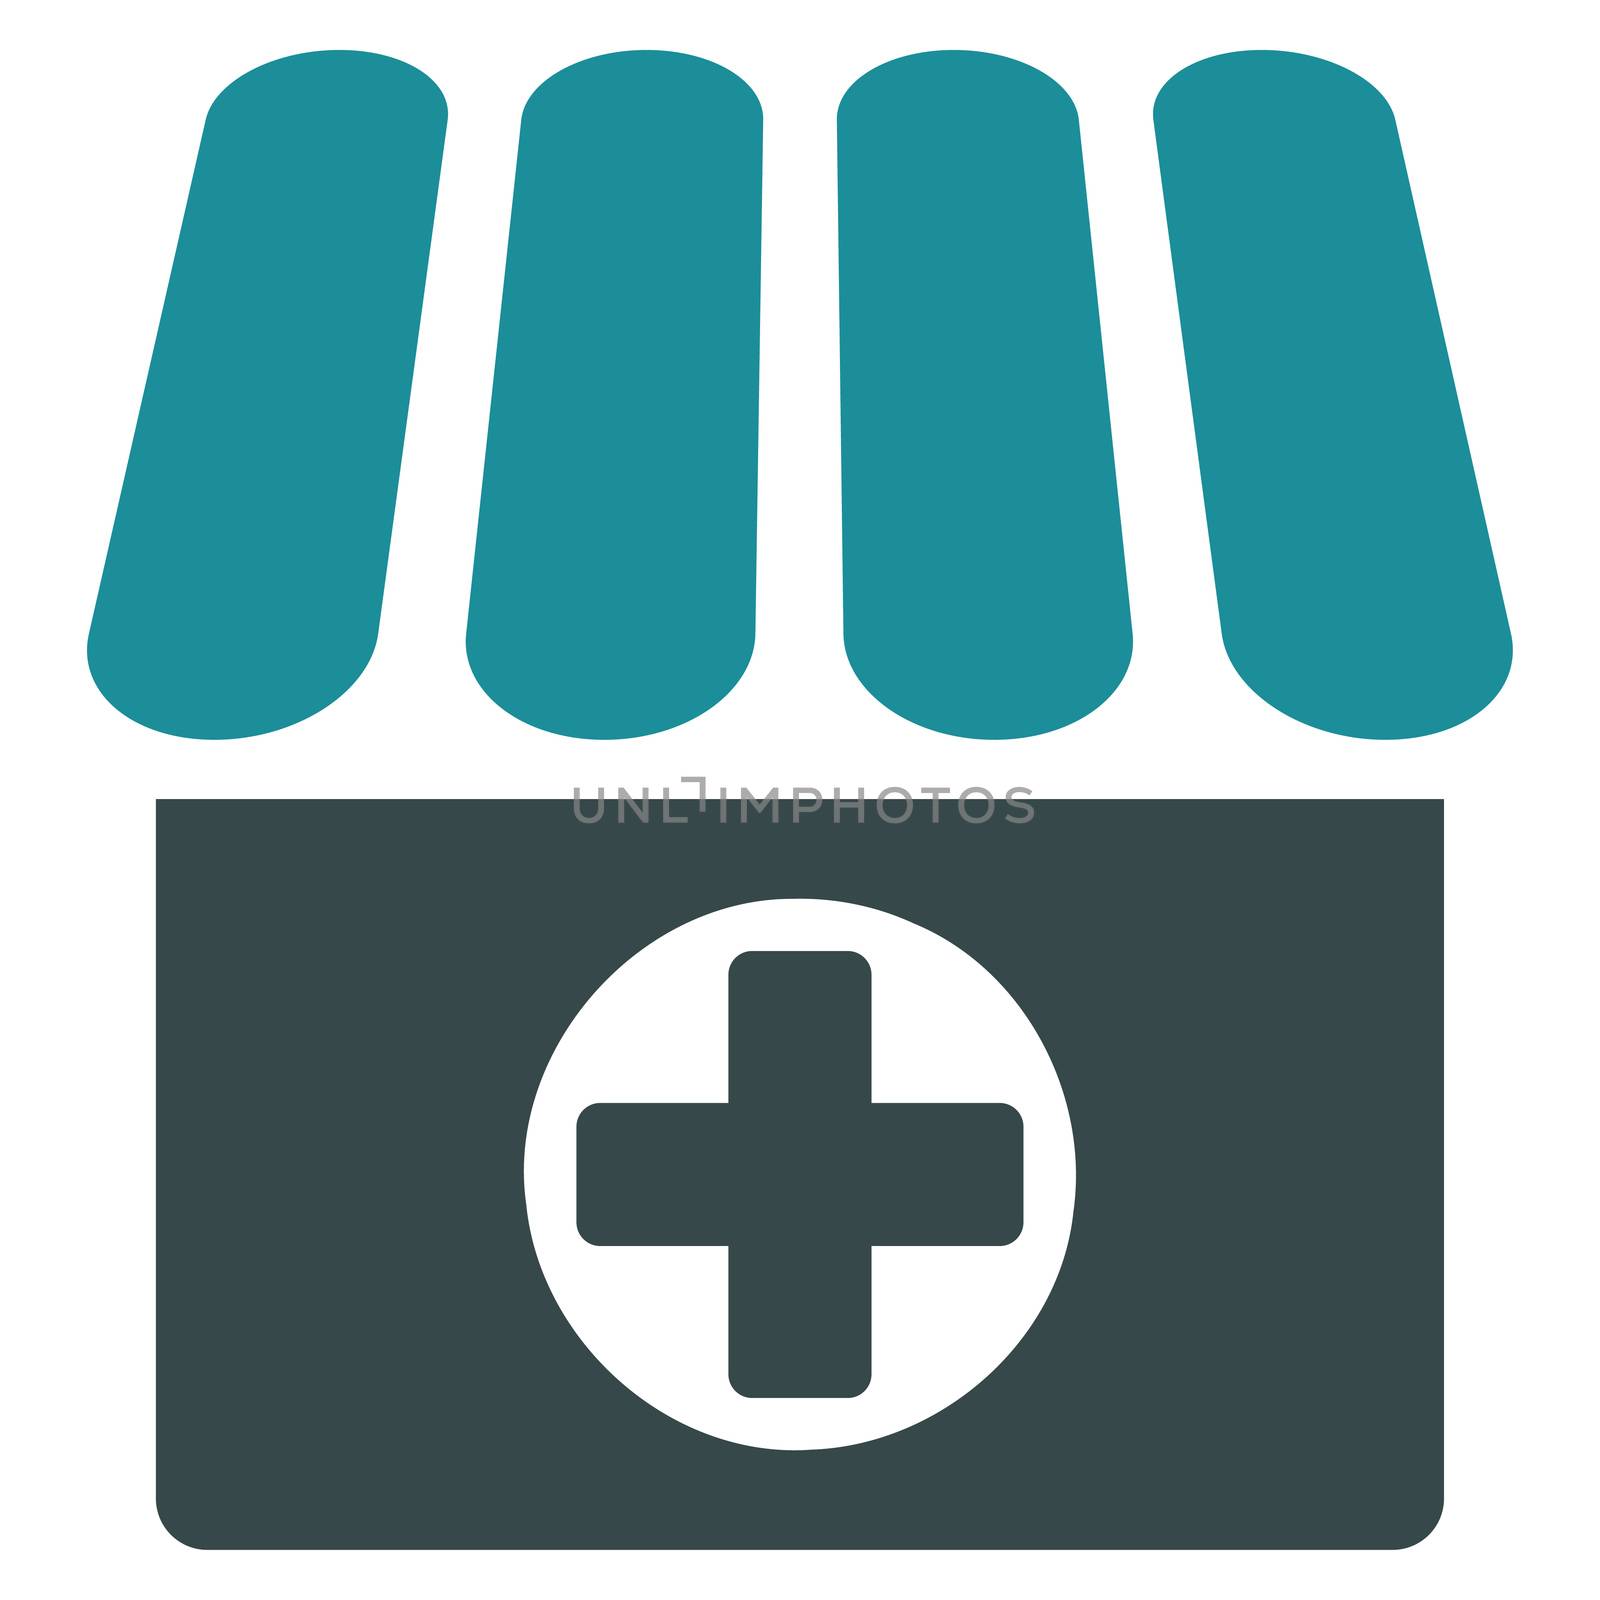 Apothecary raster icon. Style is bicolor flat symbol, soft blue colors, rounded angles, white background.